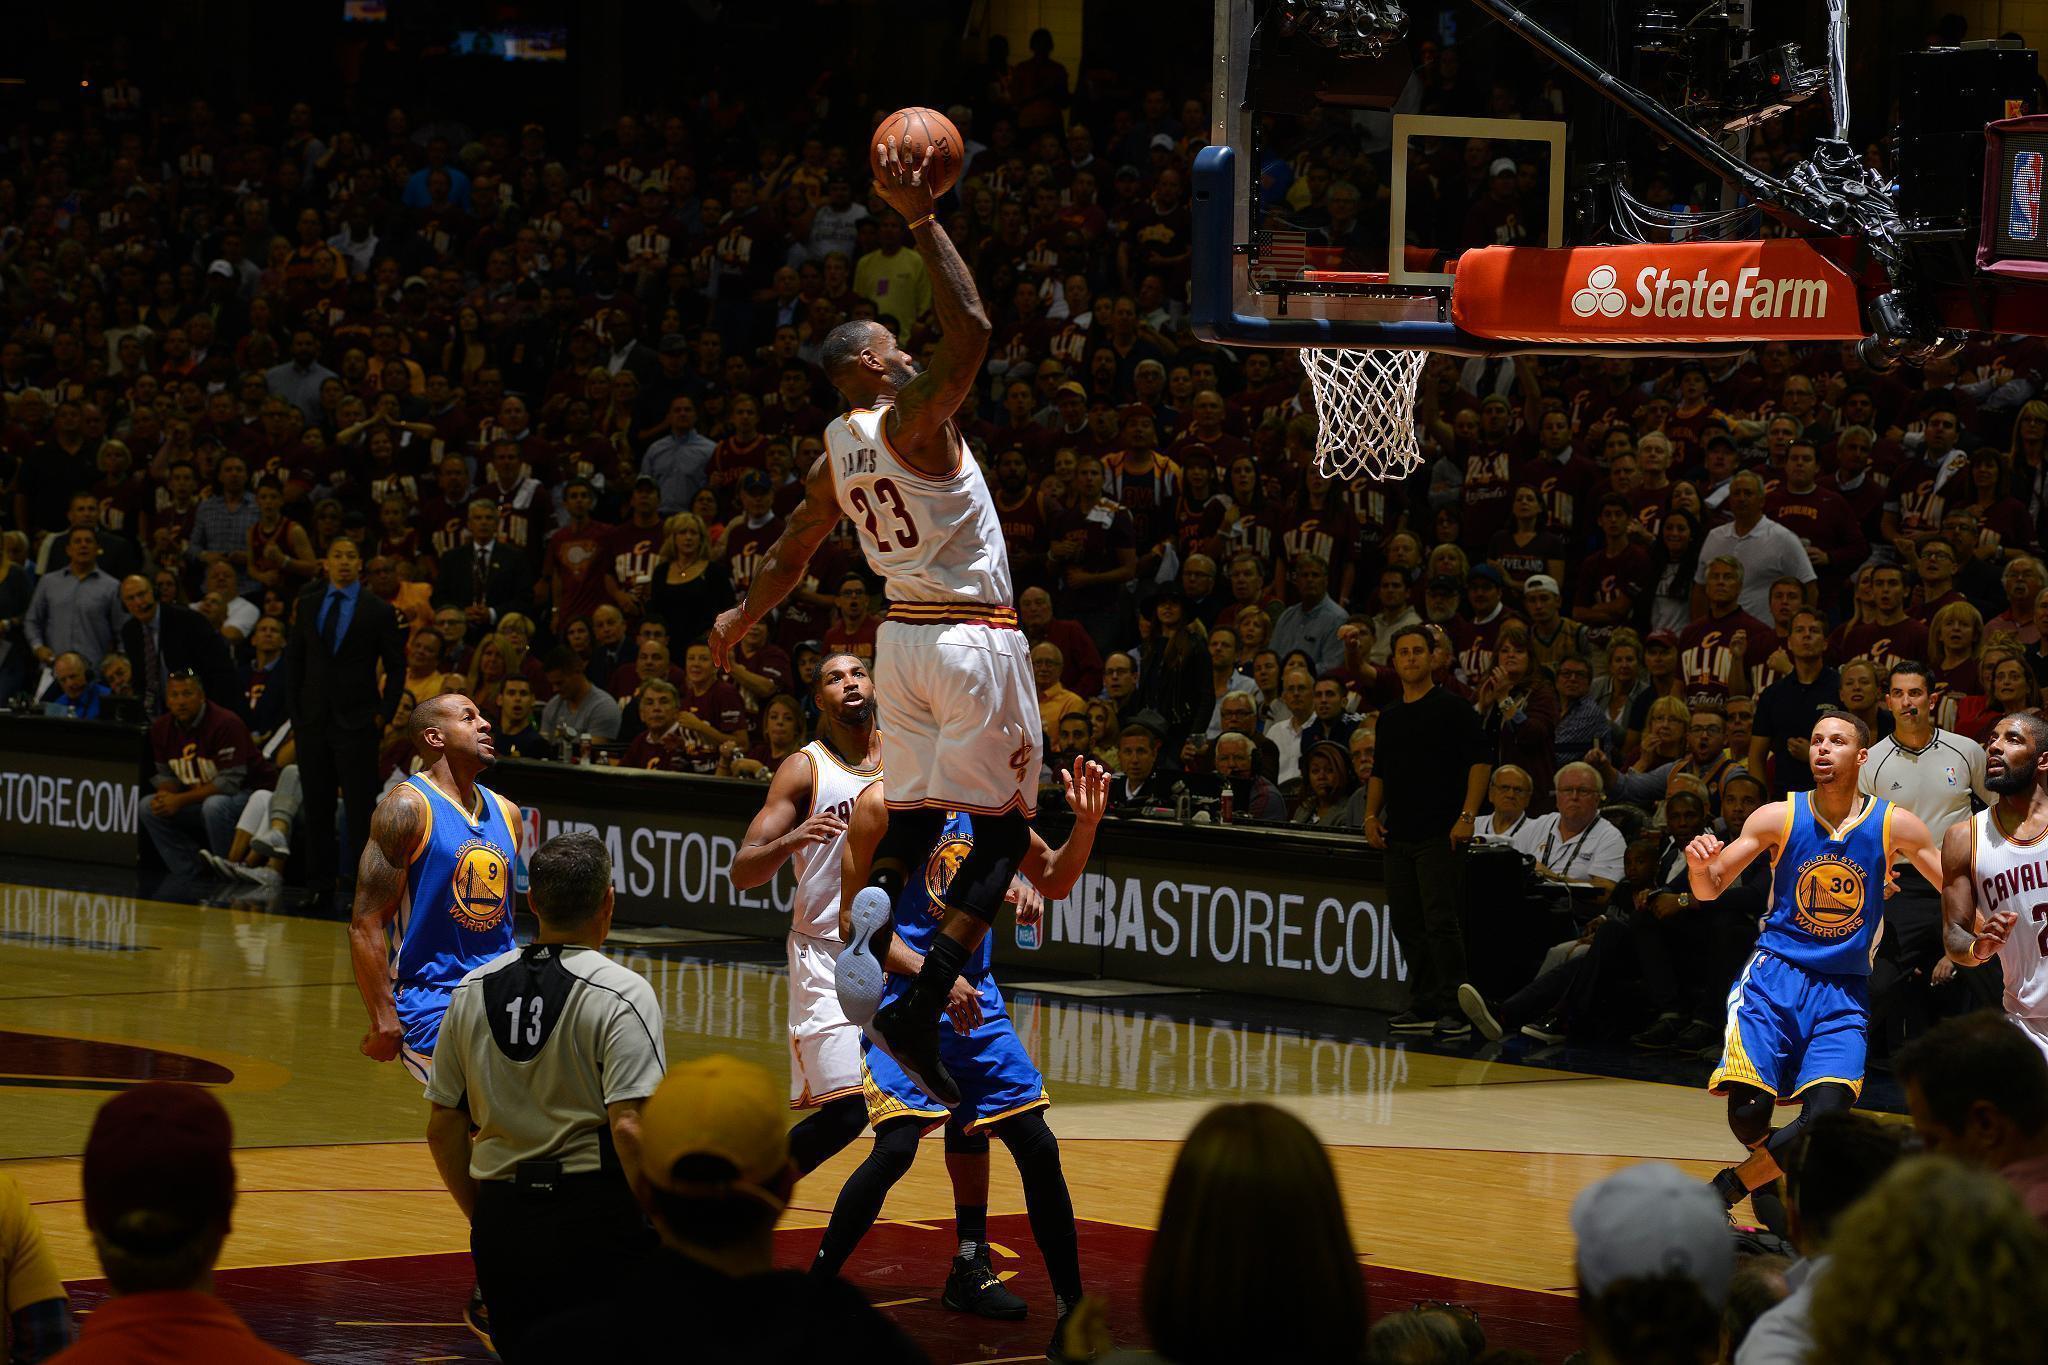 WATCH: LeBron James Throws Down Thunderous Alley Oop Dunk